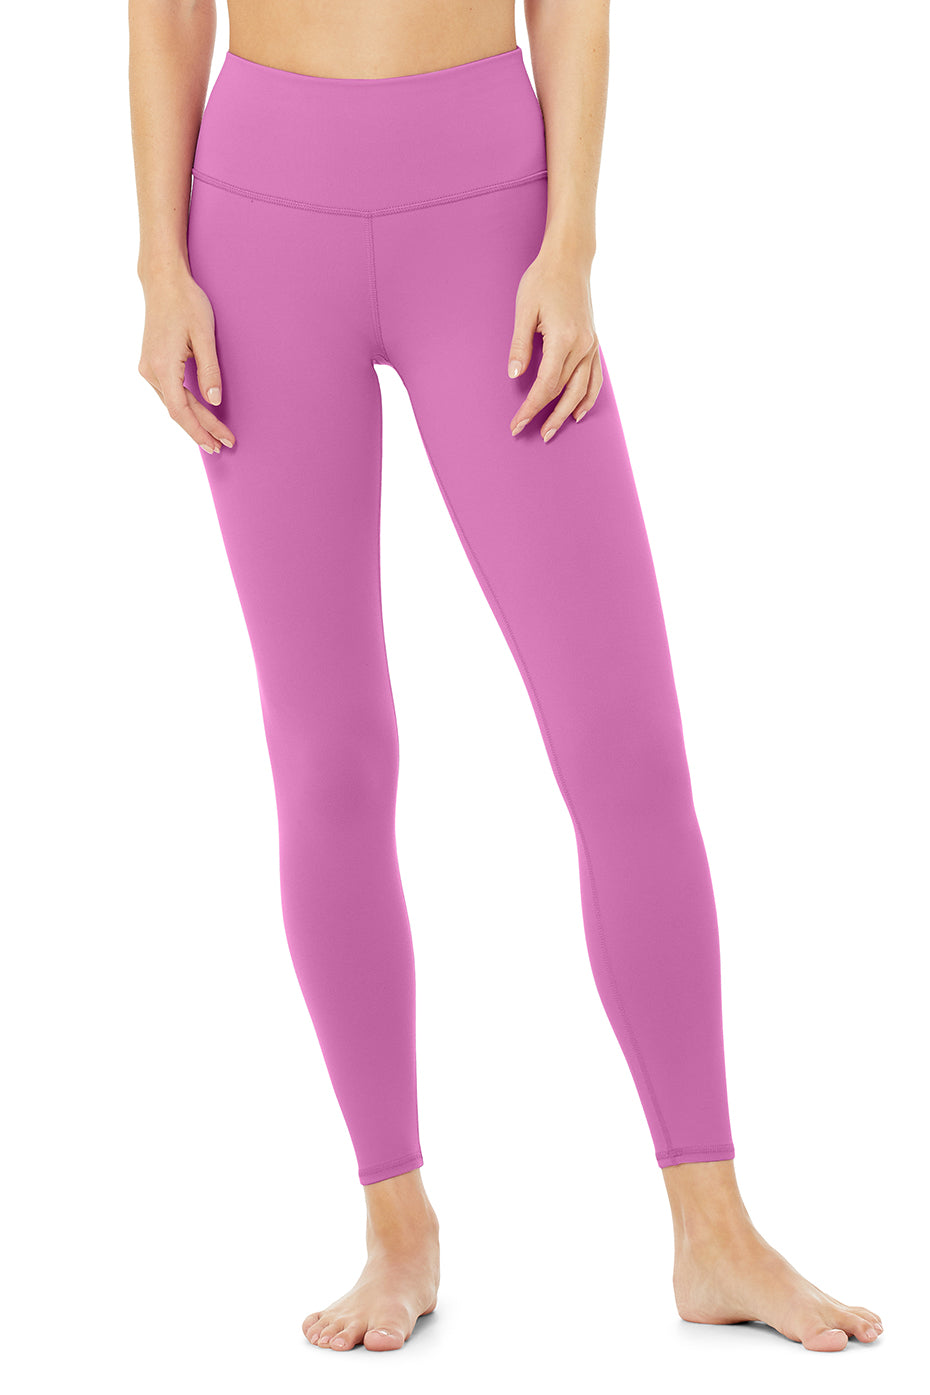 7/8 High-Waist Airbrush Legging in Electric Violet by Alo Yoga